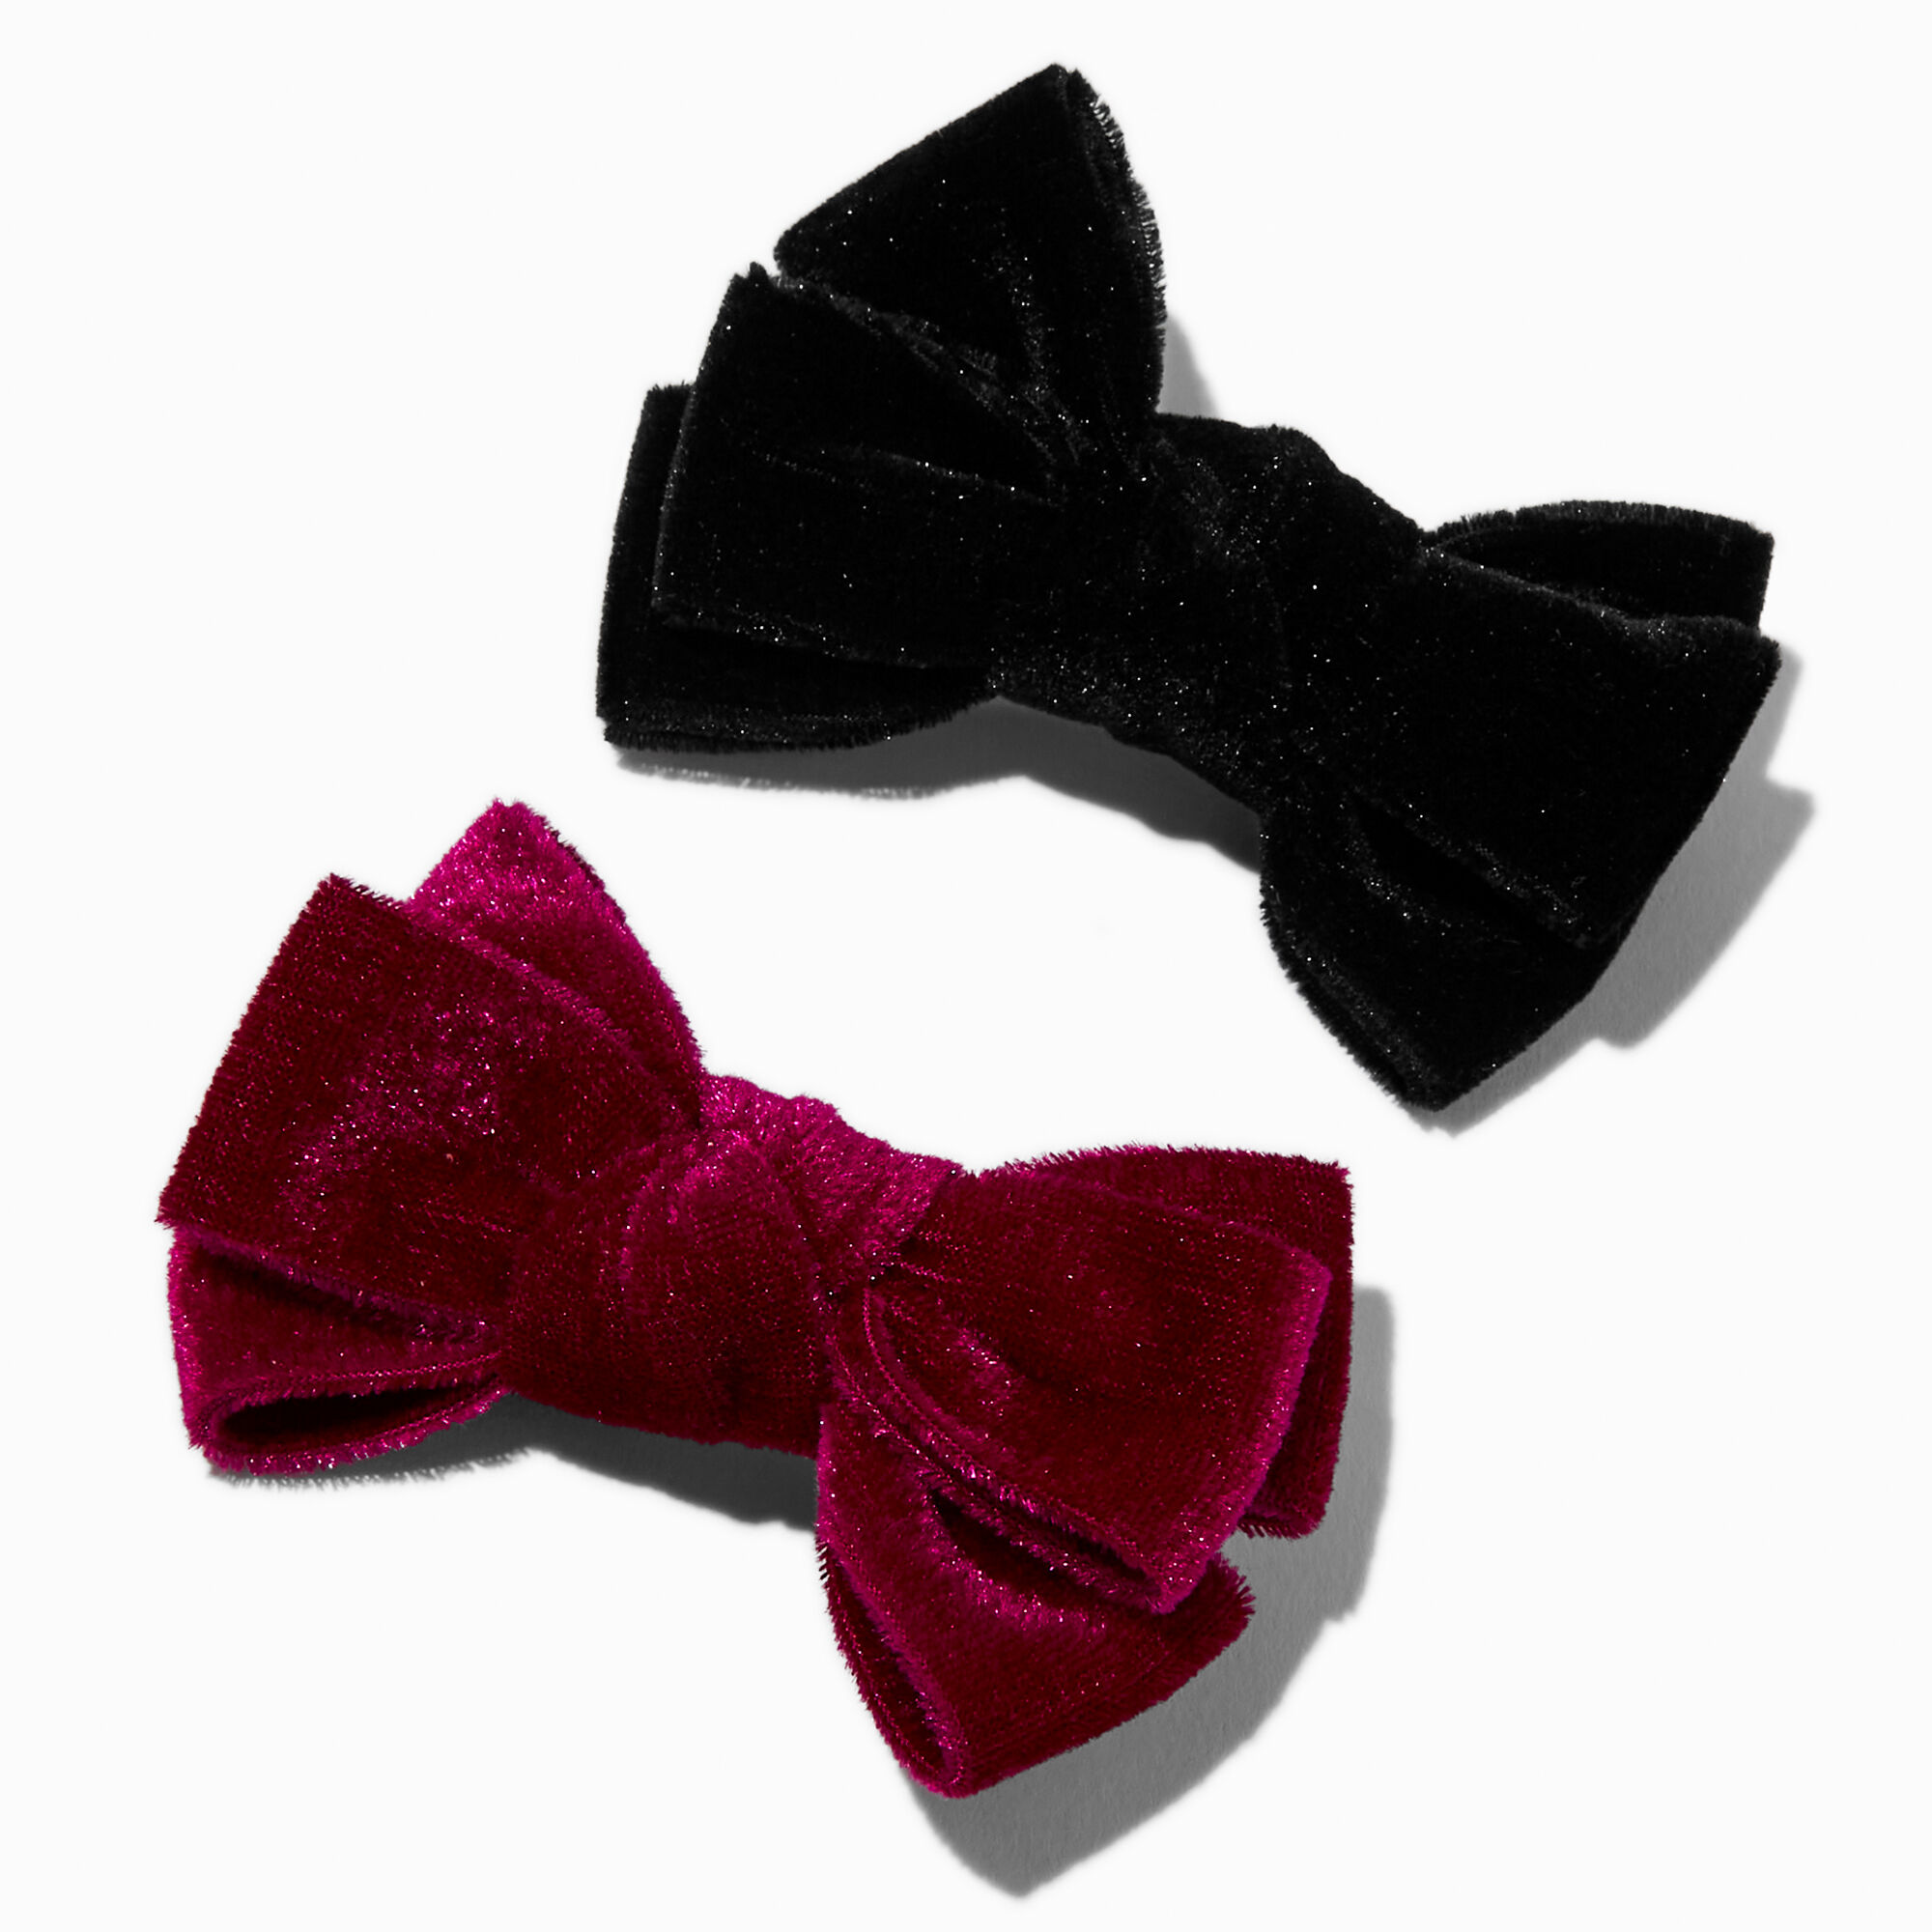 View Claires Pink Velvet Bow Hair Clips 2 Pack Black information